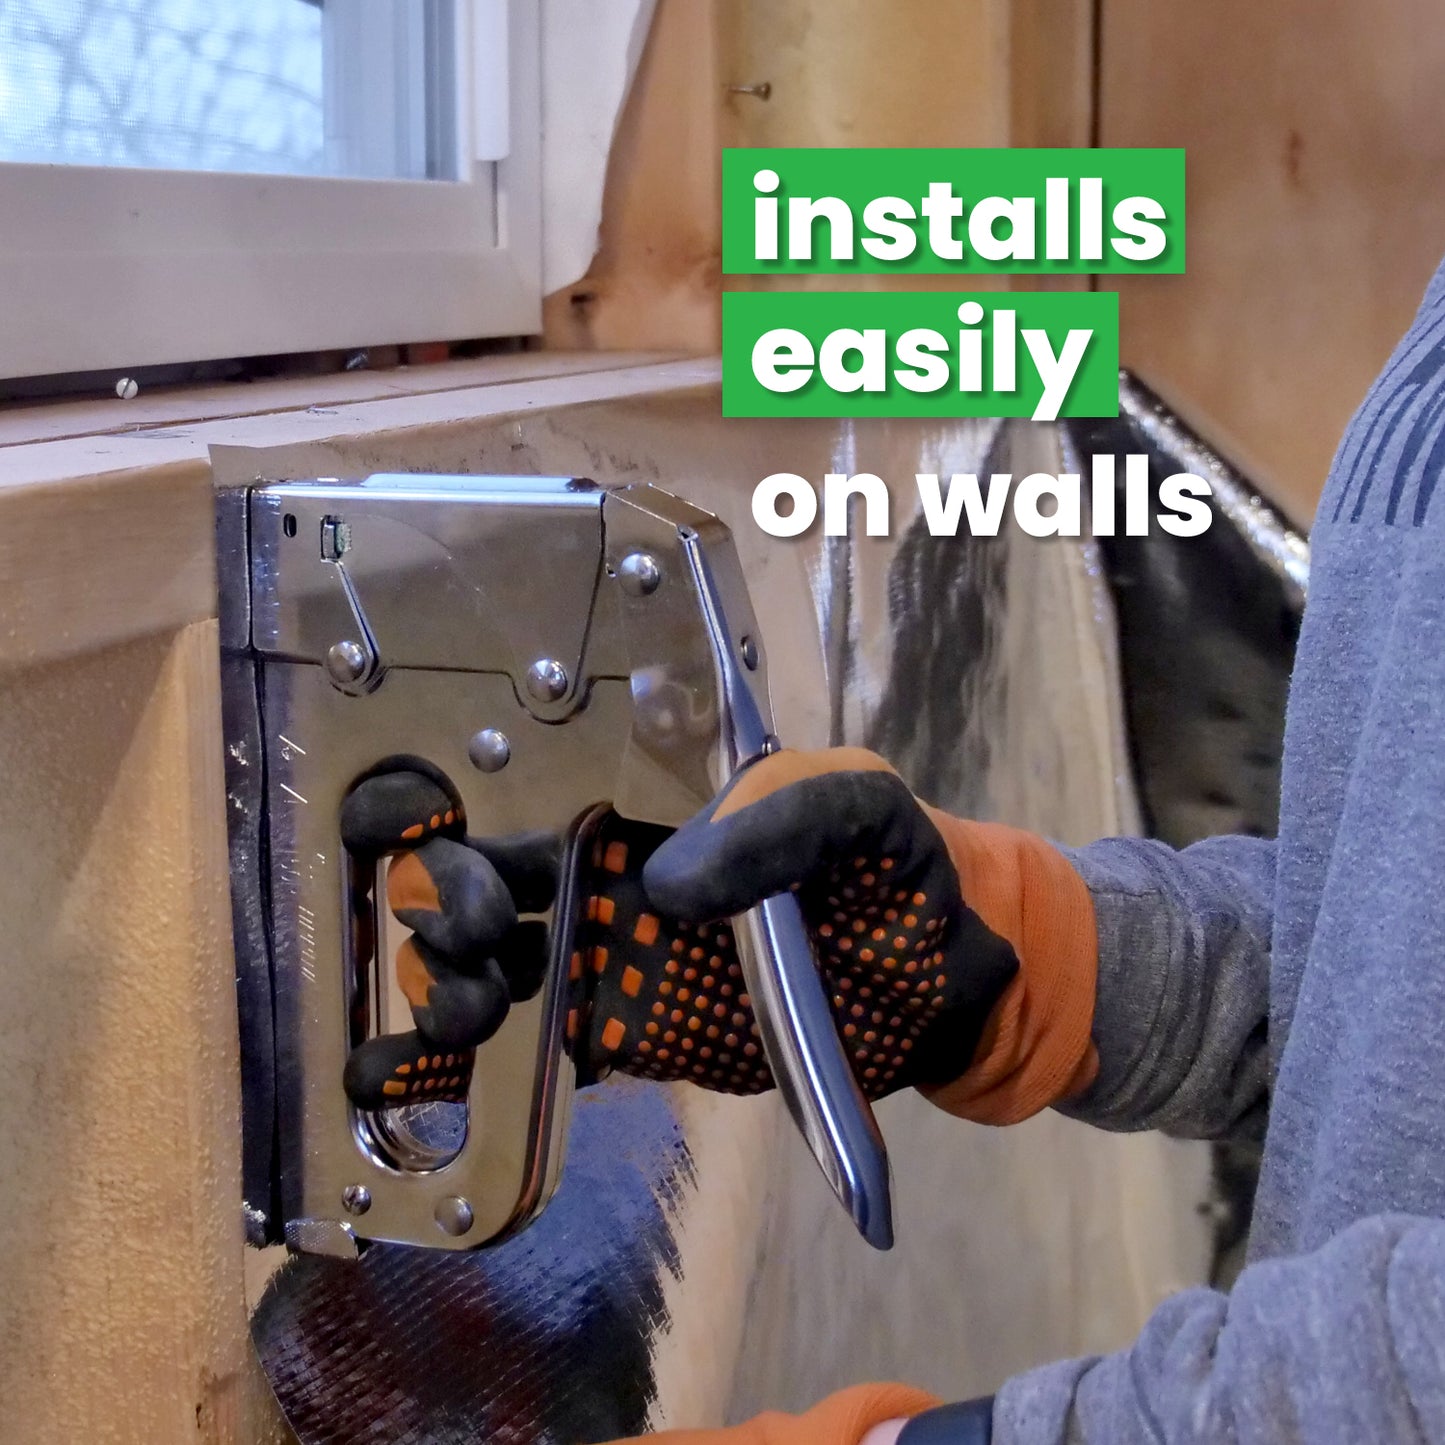 installs easily on walls